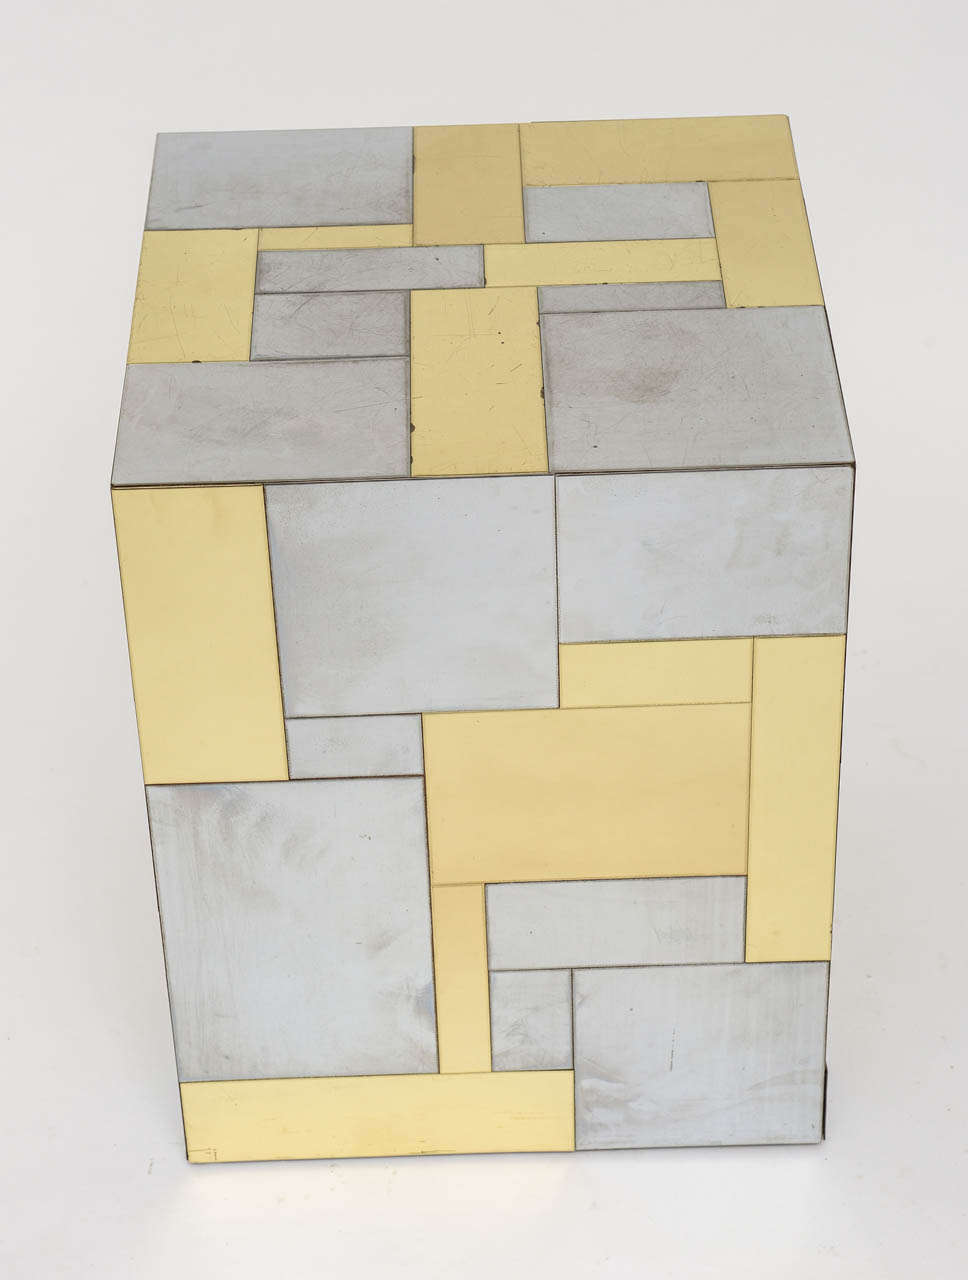 Paul Evans' Cityscape cube #437 in Chrome and Brass.
Signed on the side